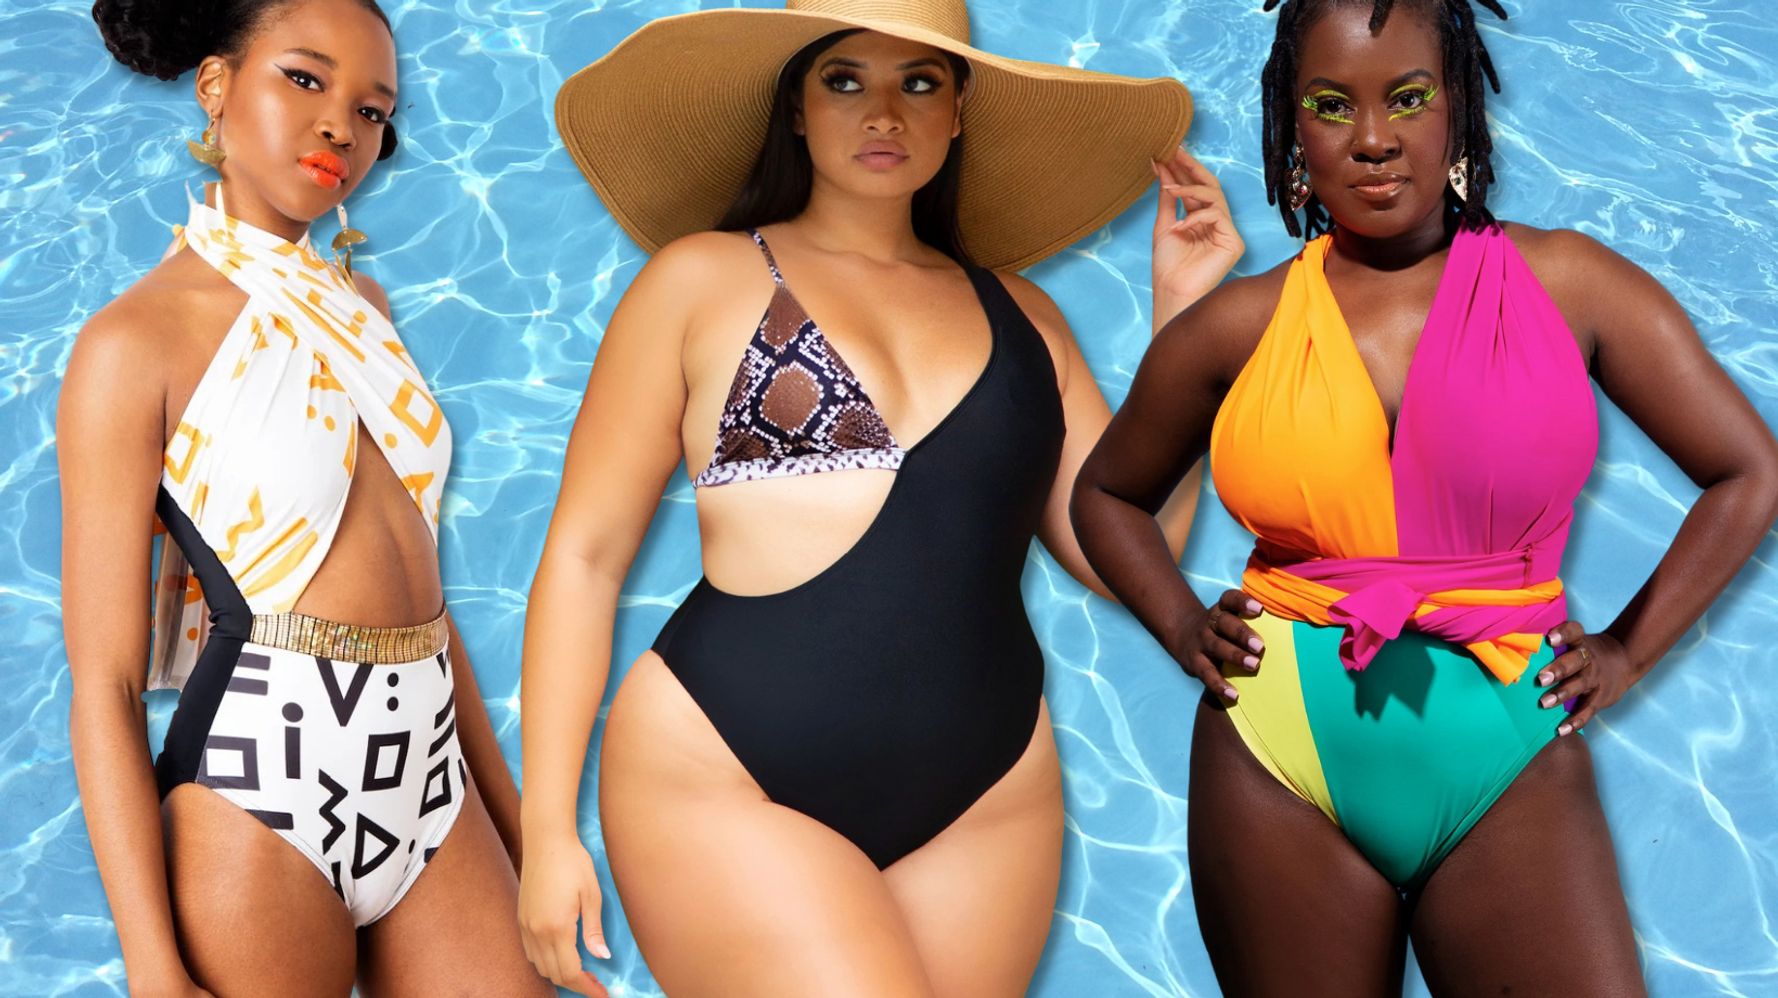 10 Best Swimsuit Cover Ups for 2018 - Cute Bathing Suit Cover Ups